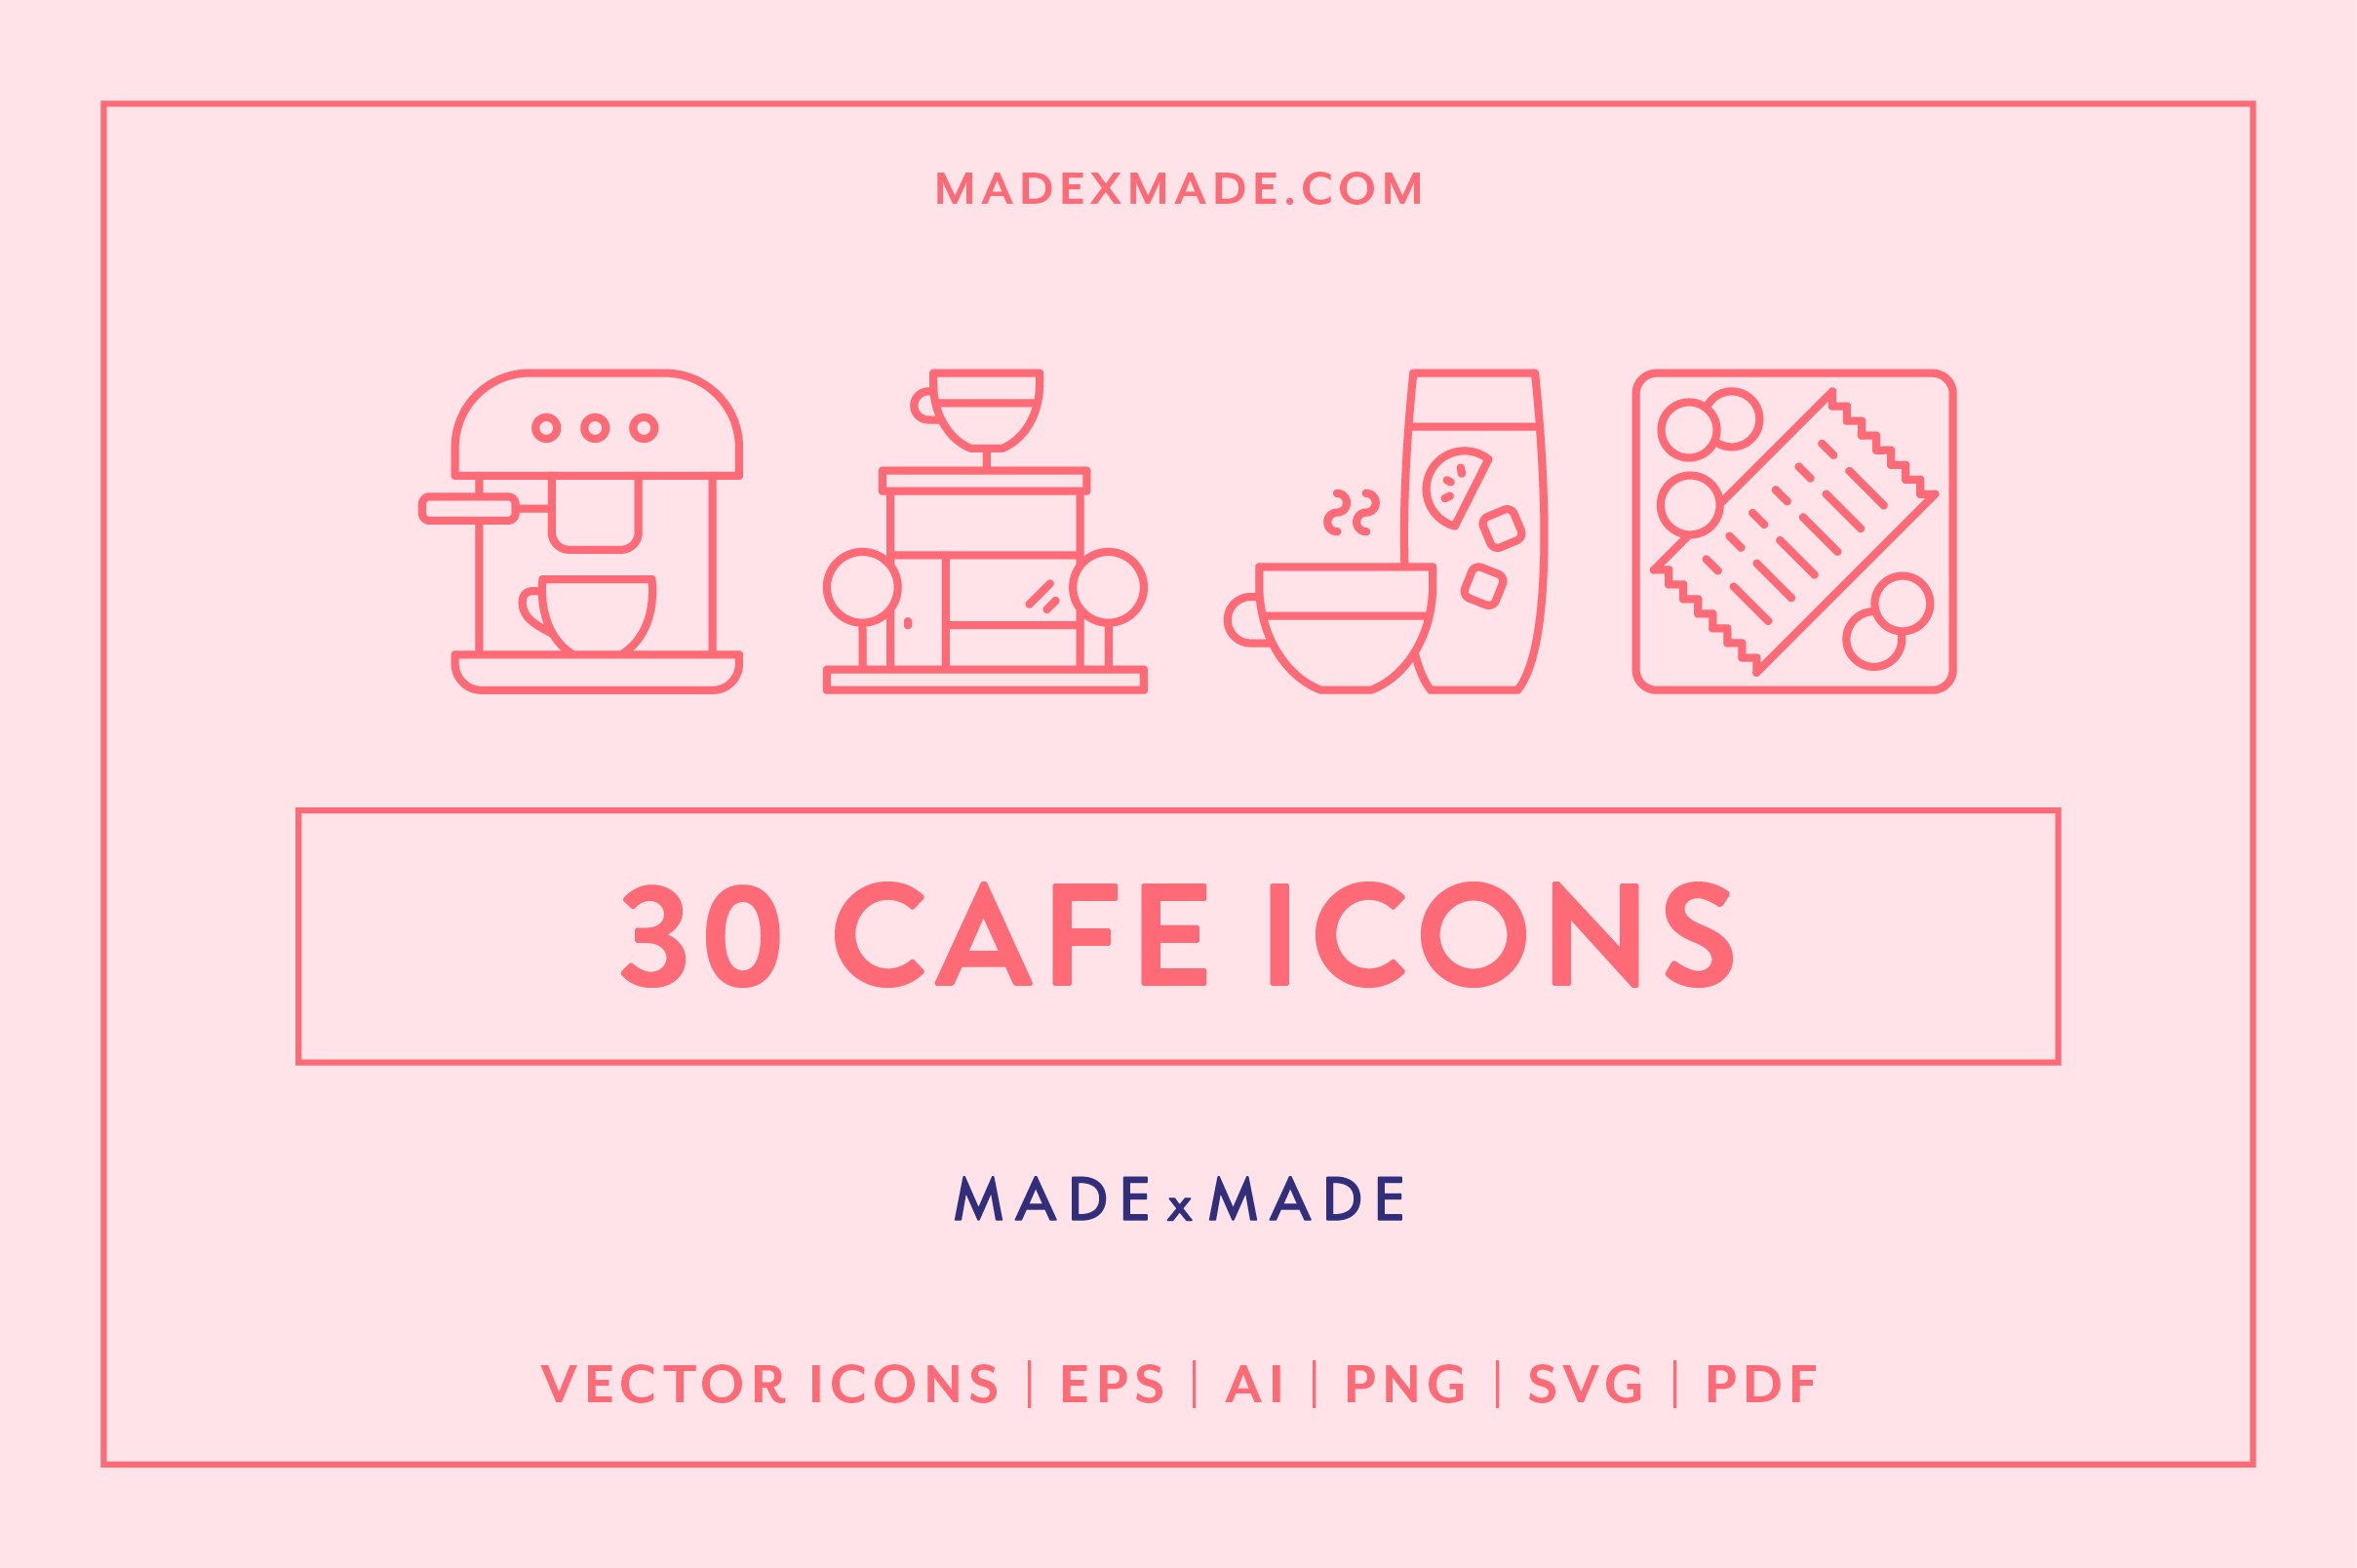 Cafe Line Icons cover image.